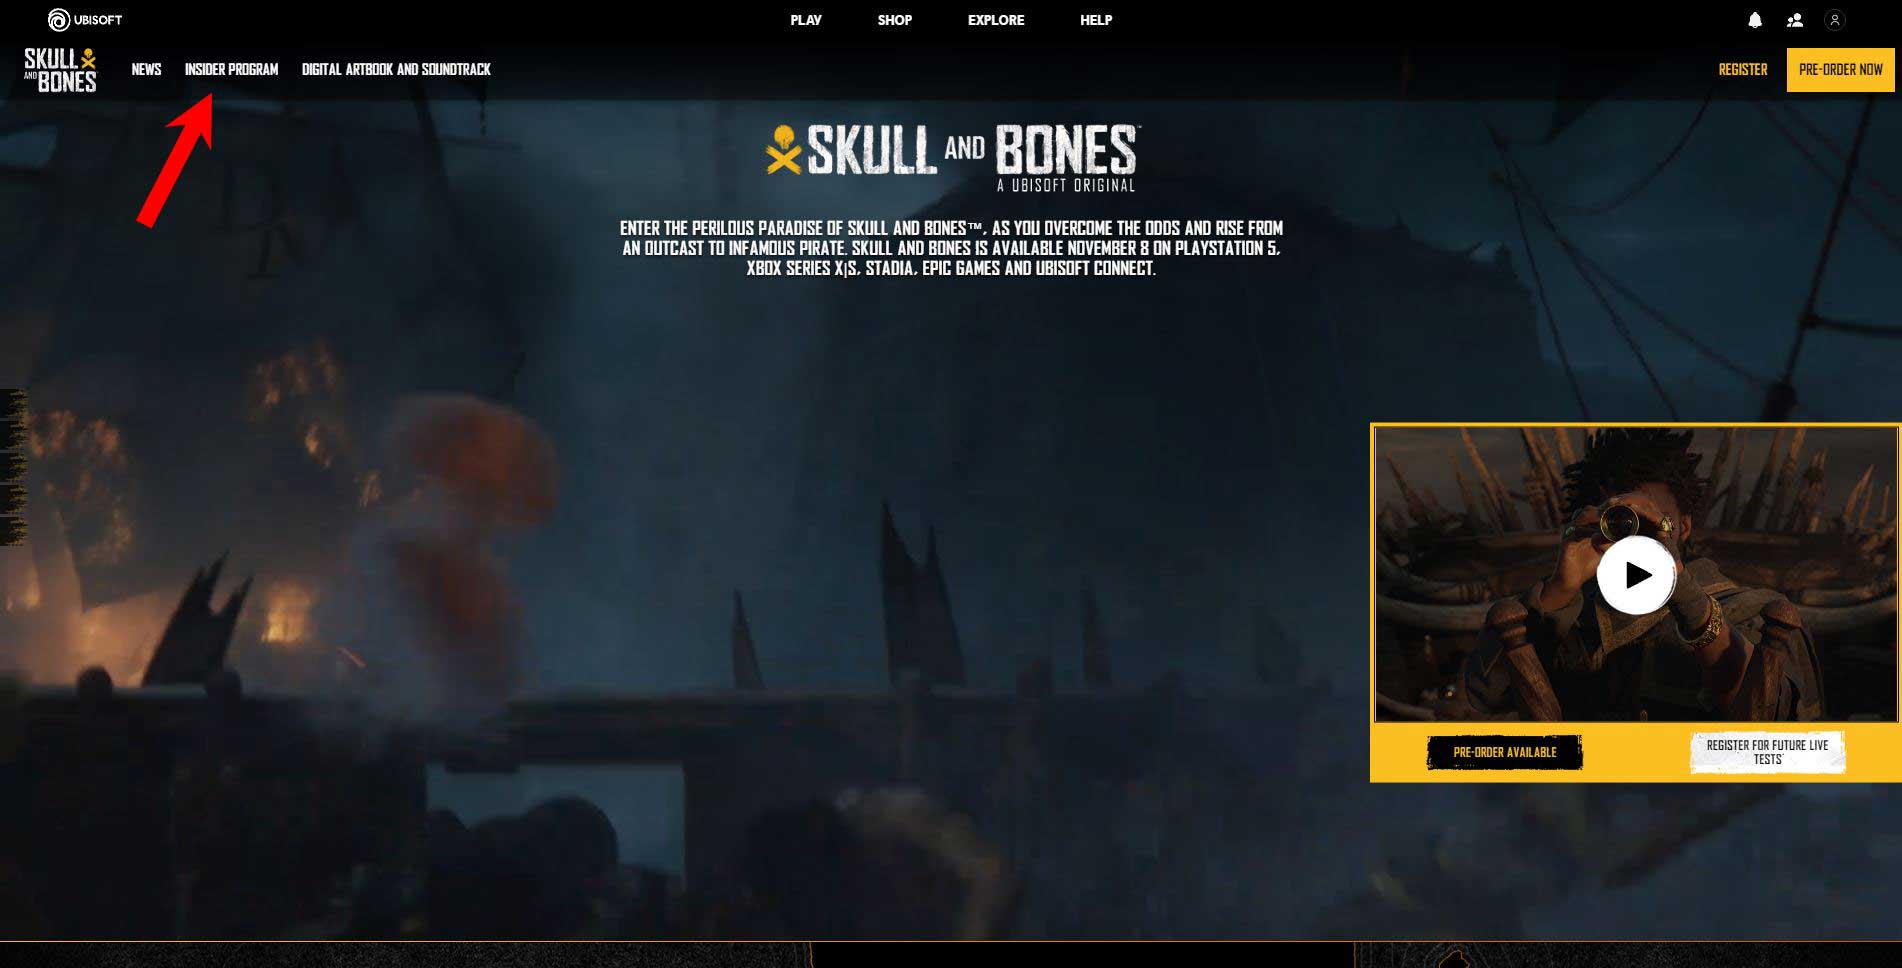 How to play Skull and Bones early - Dot Esports